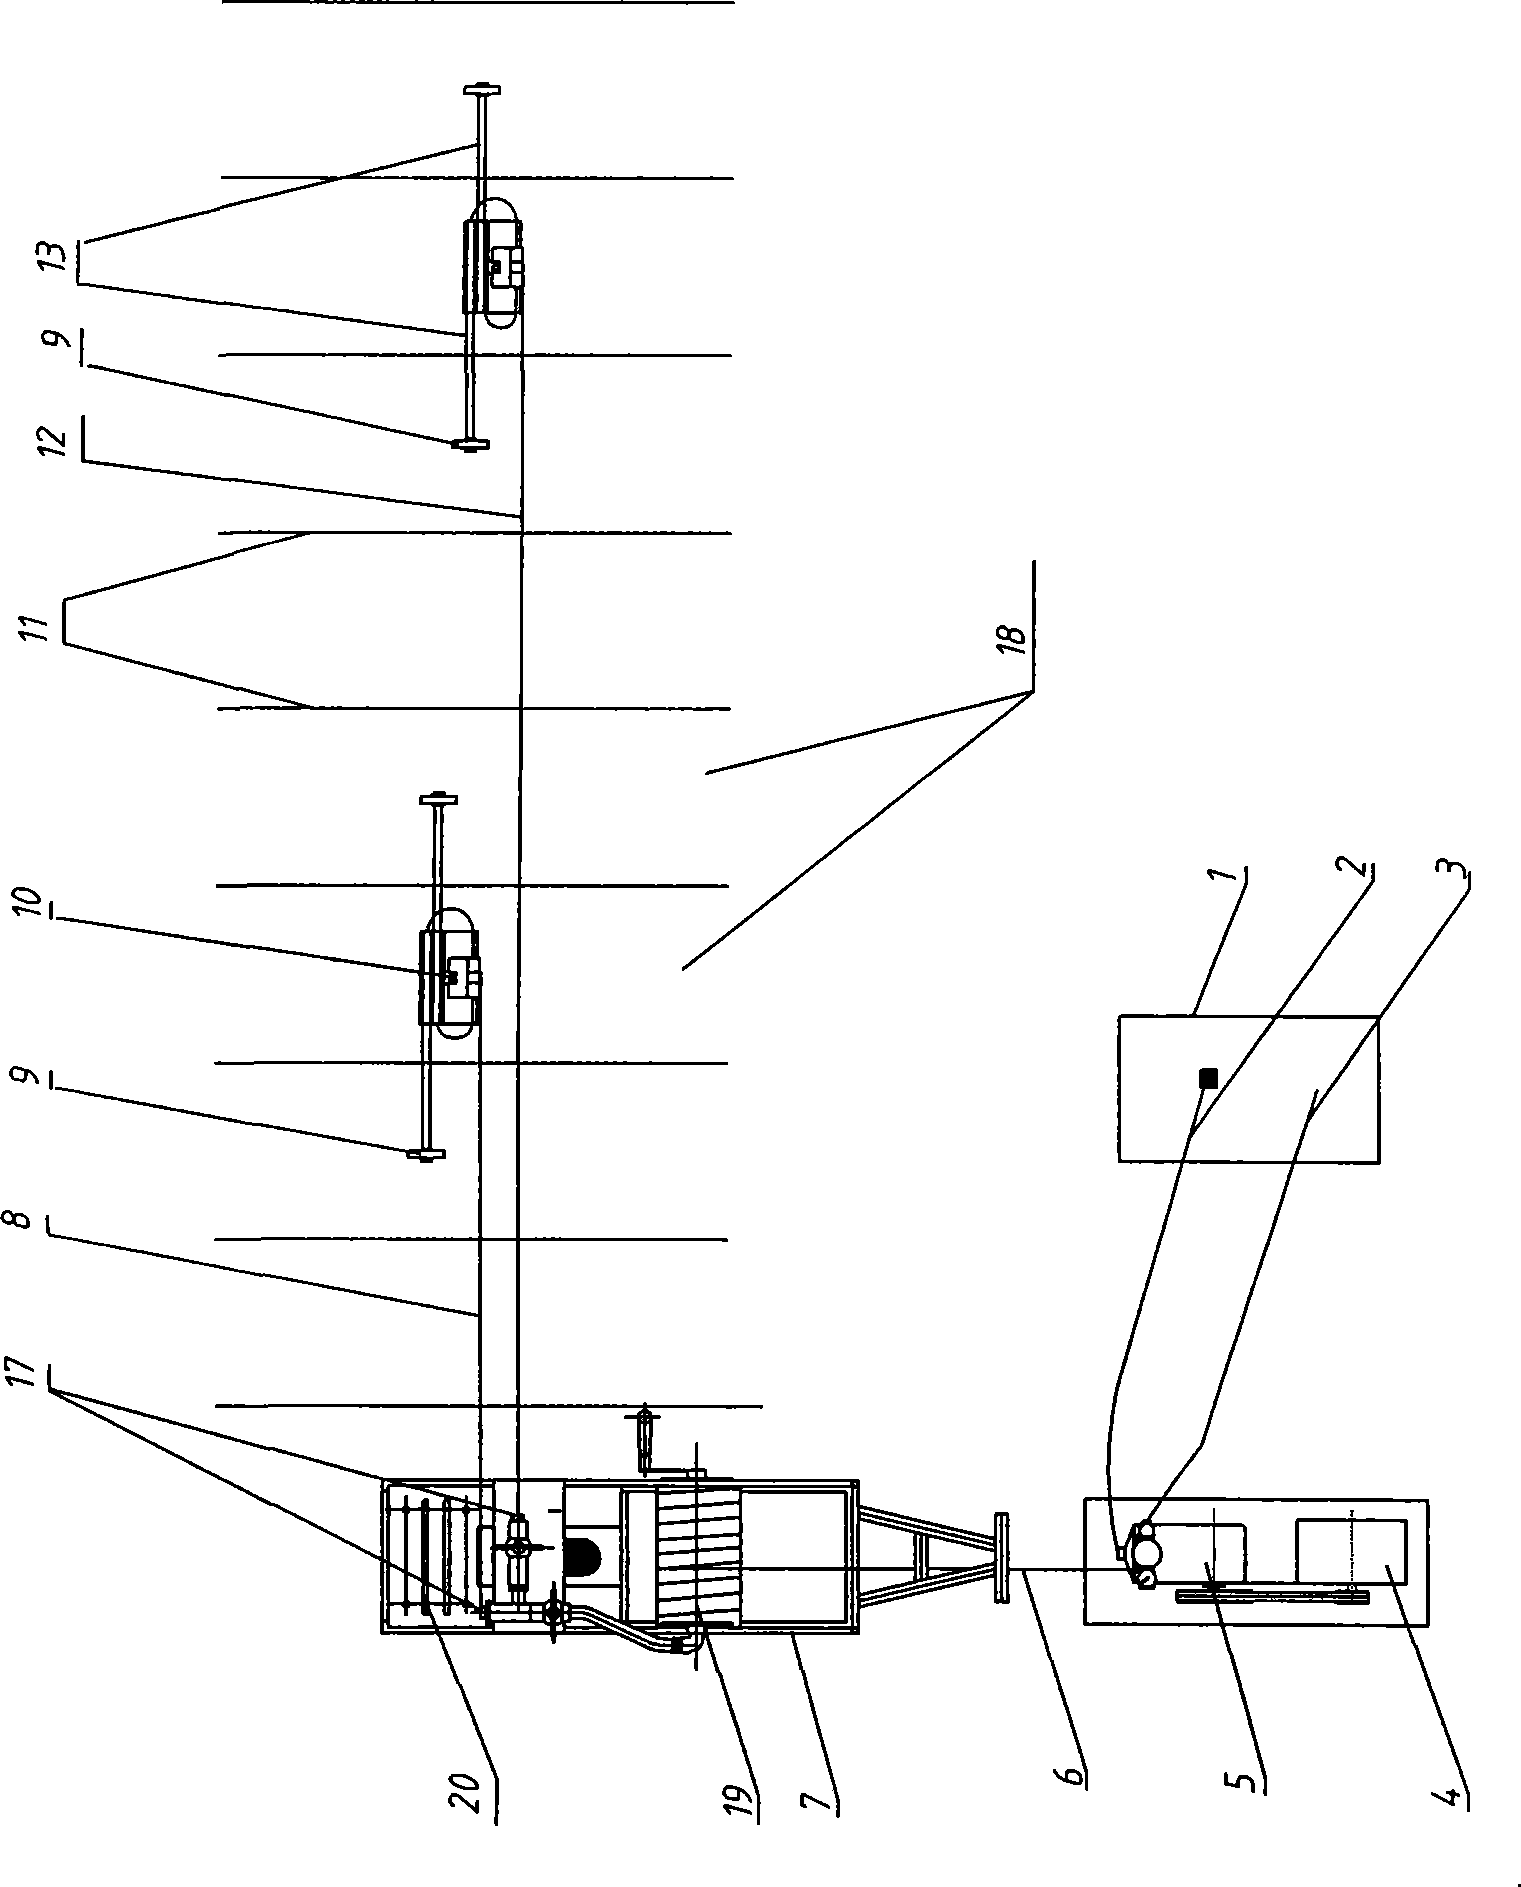 Spray irrigation equipment for row crop and arrangement mode of the spray irrigation equipment in field